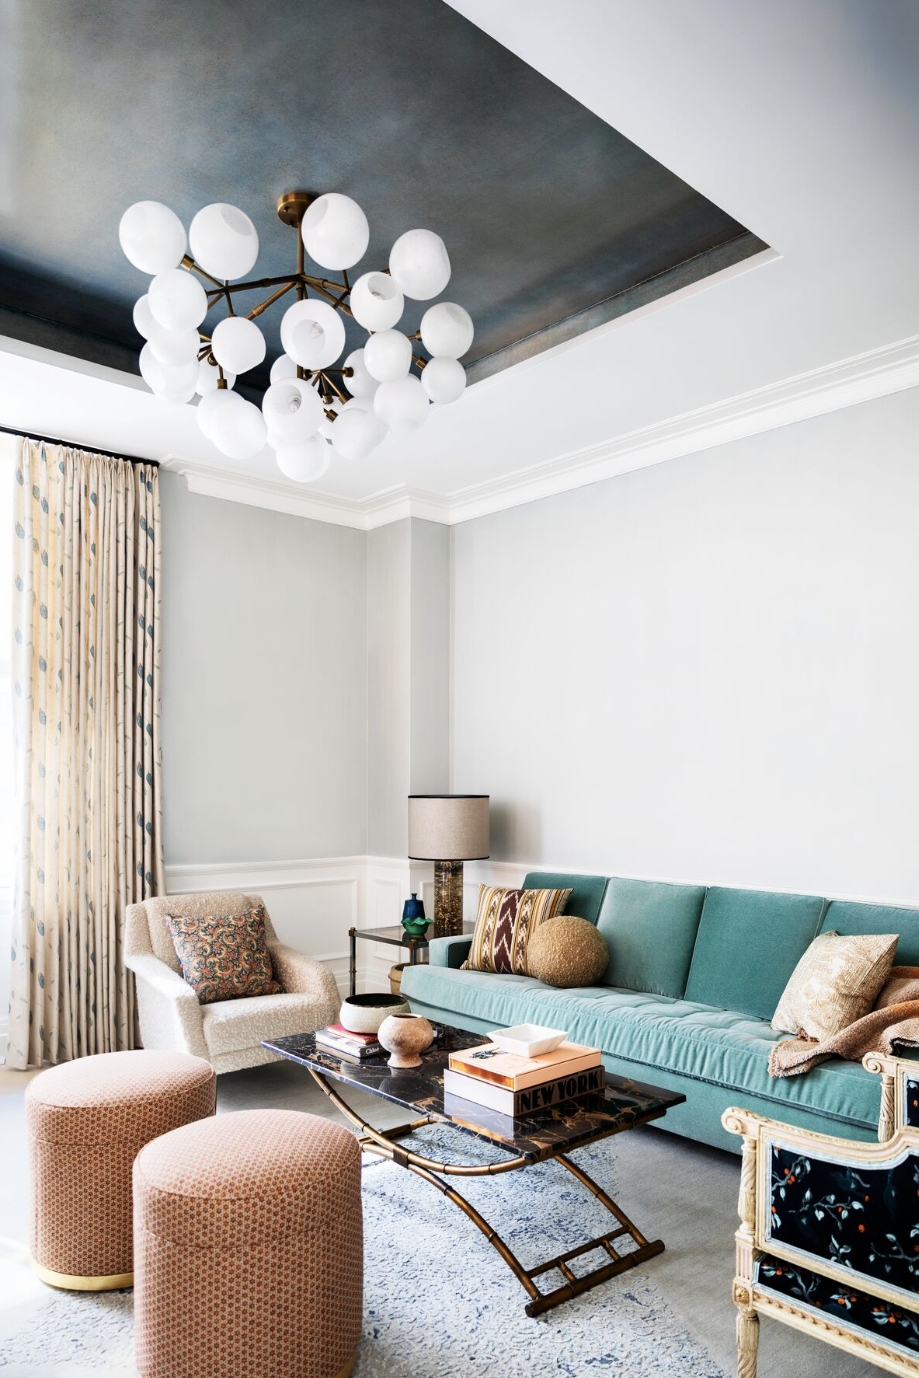 living room ideas, tray ceiling in room with globe lighting and turquoise couch